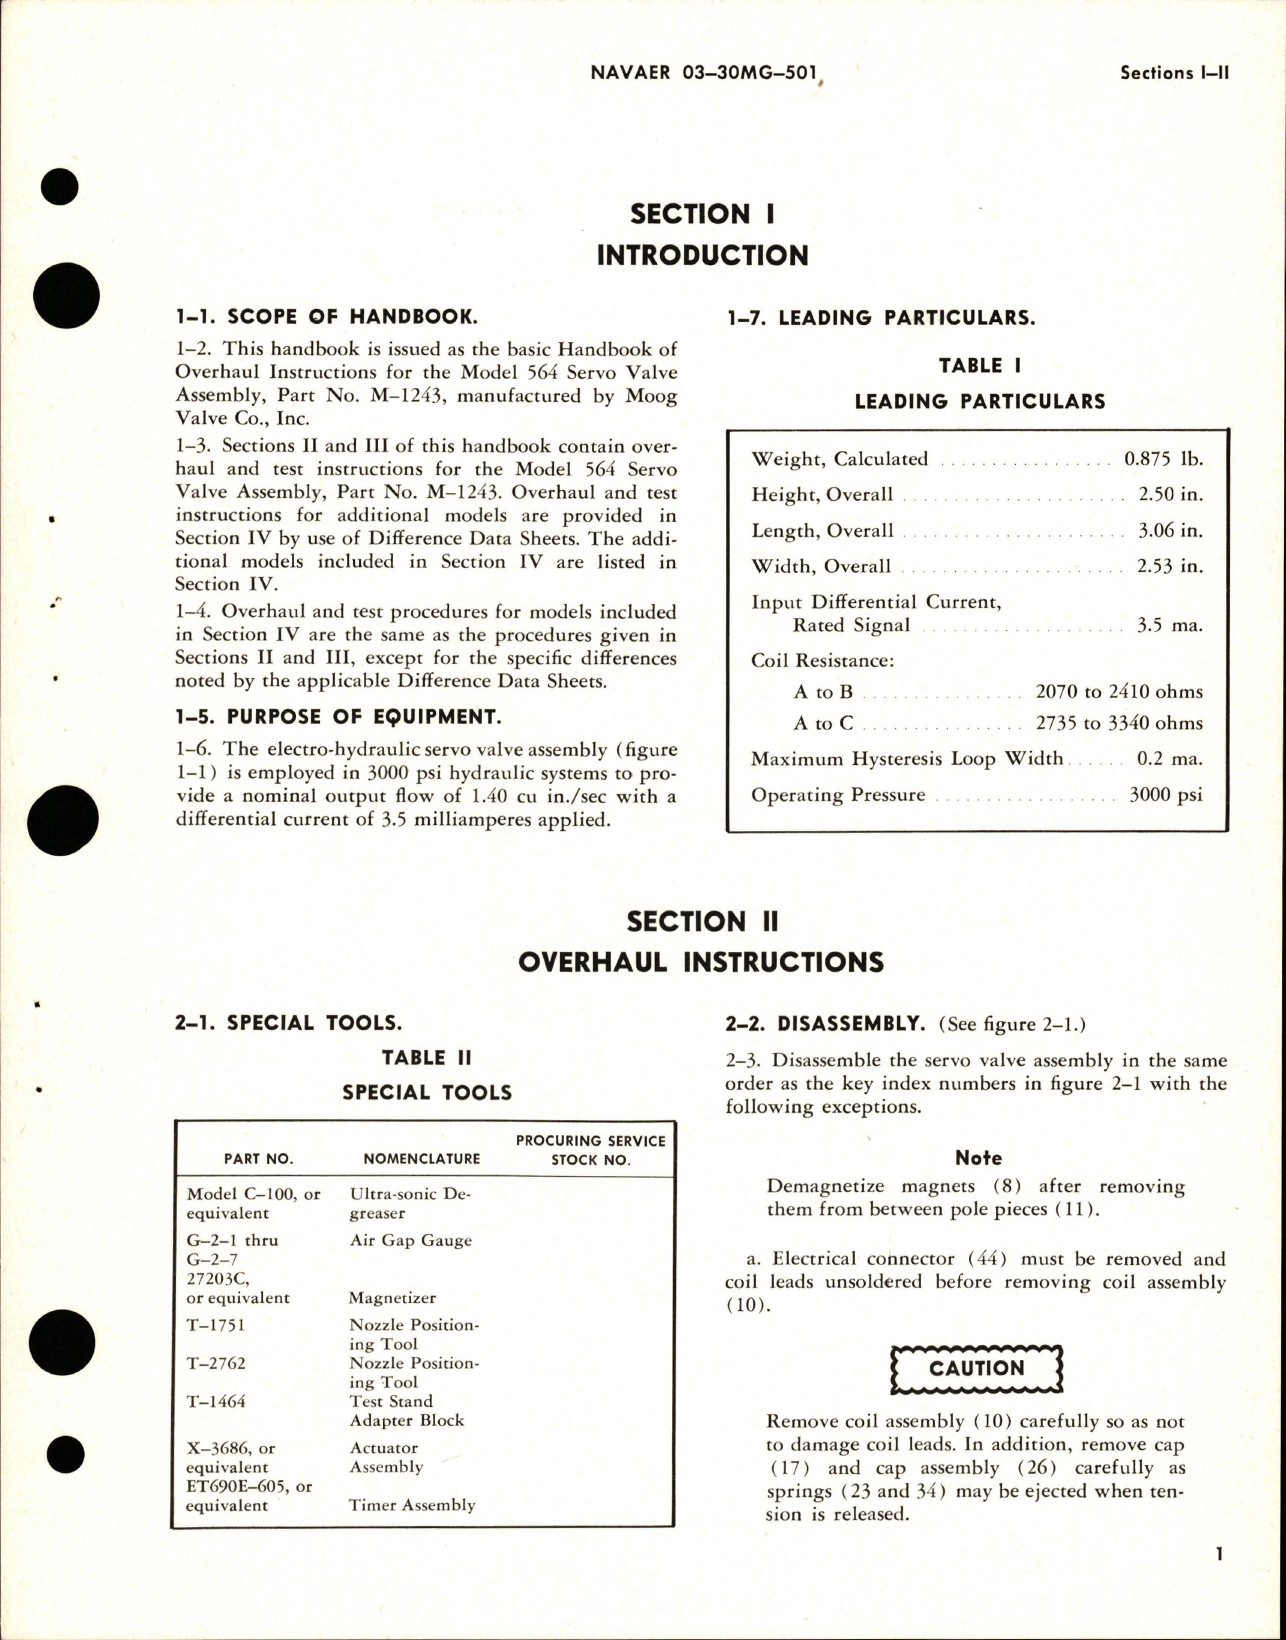 Sample page 5 from AirCorps Library document: Overhaul Instructions for Servo Valve Assembly - Model 564, 564A, and 571A